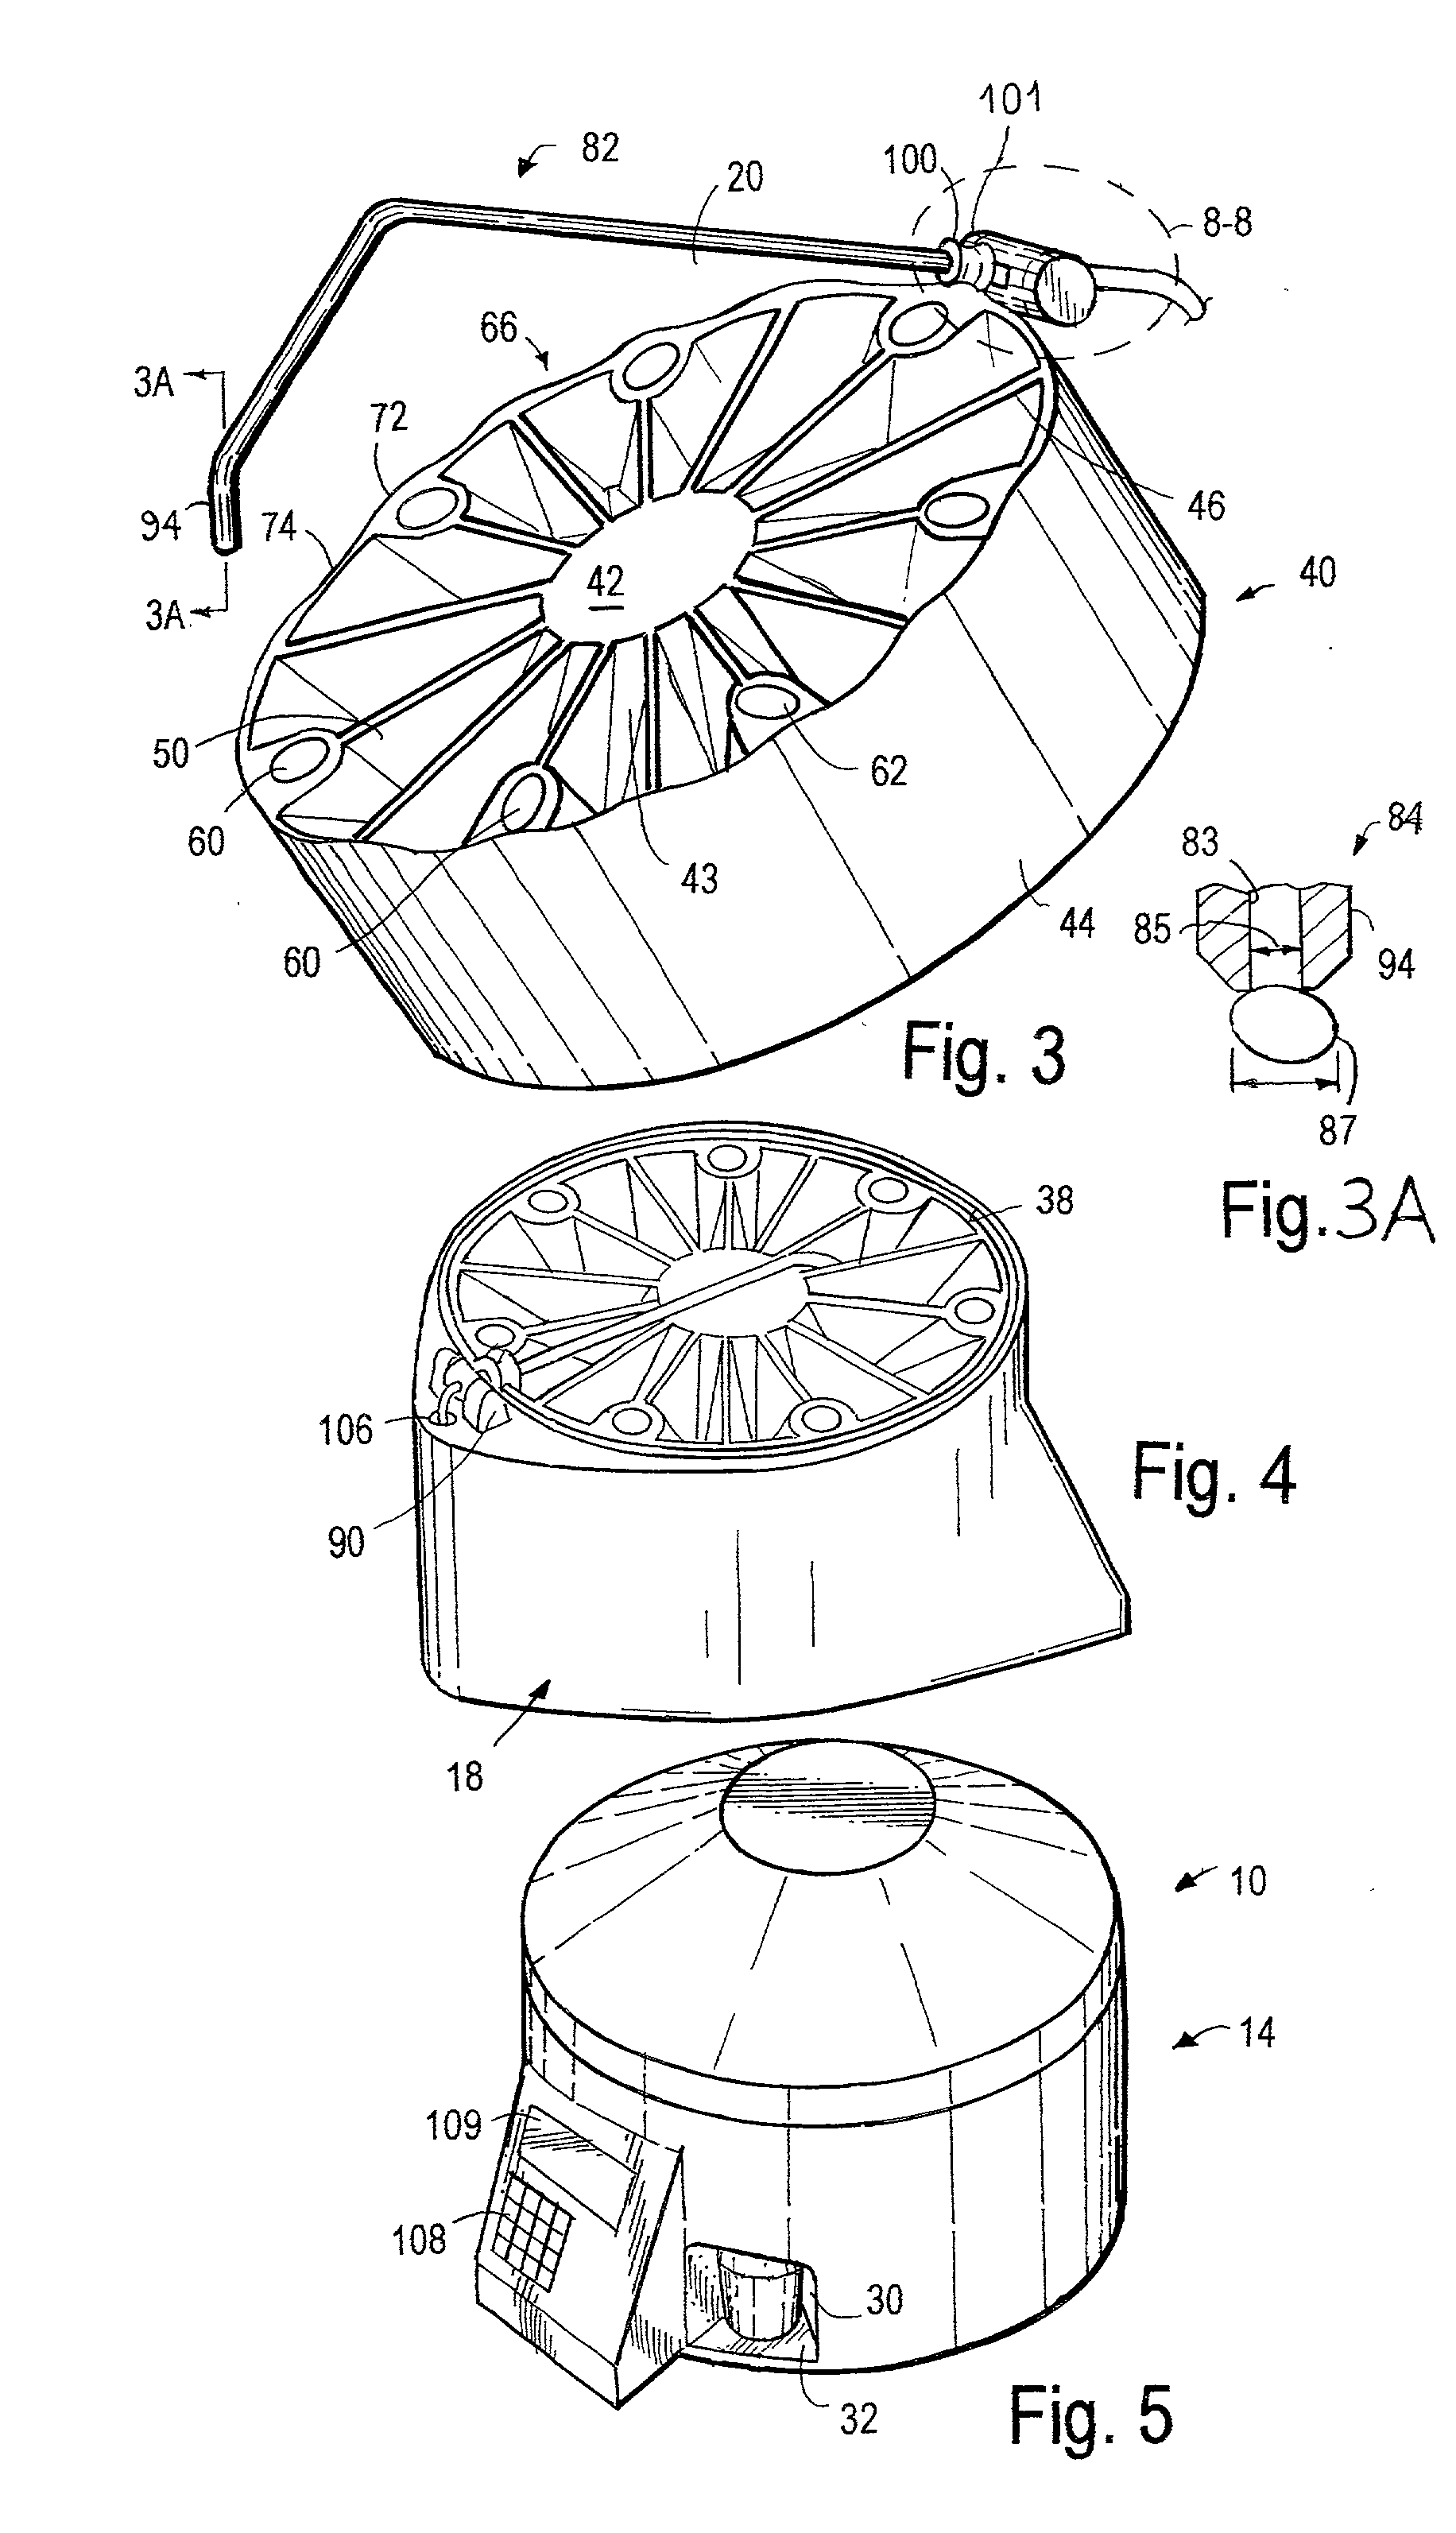 Apparatus and method for dispensing medication